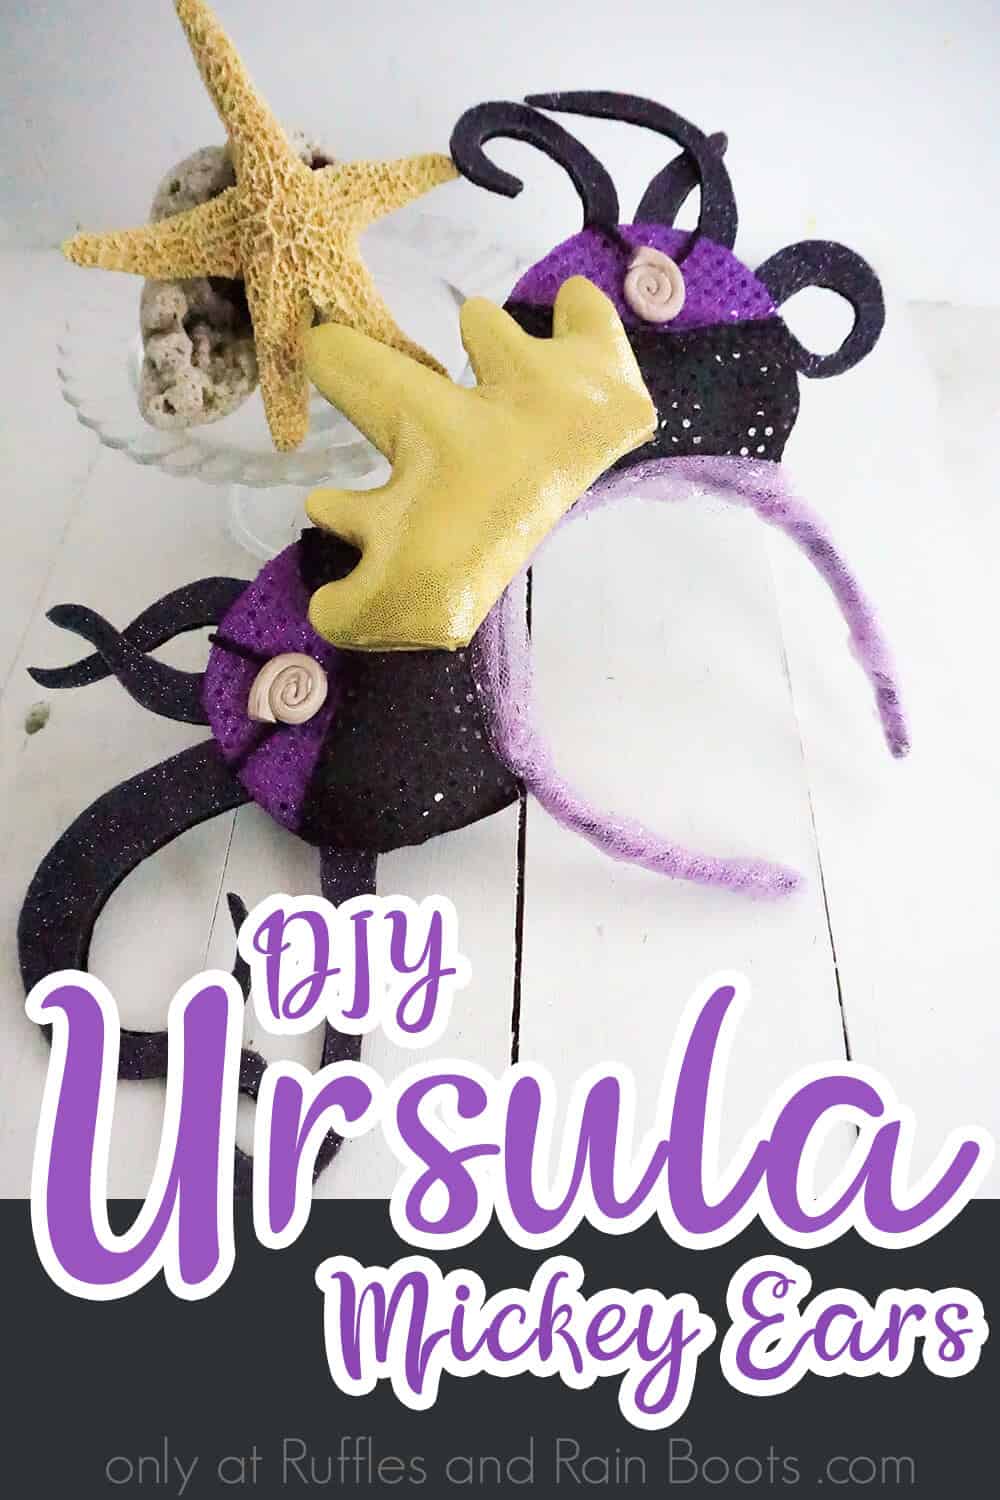 side view of disney villain mickey ears ursula with text which reads diy ursula mickey ears